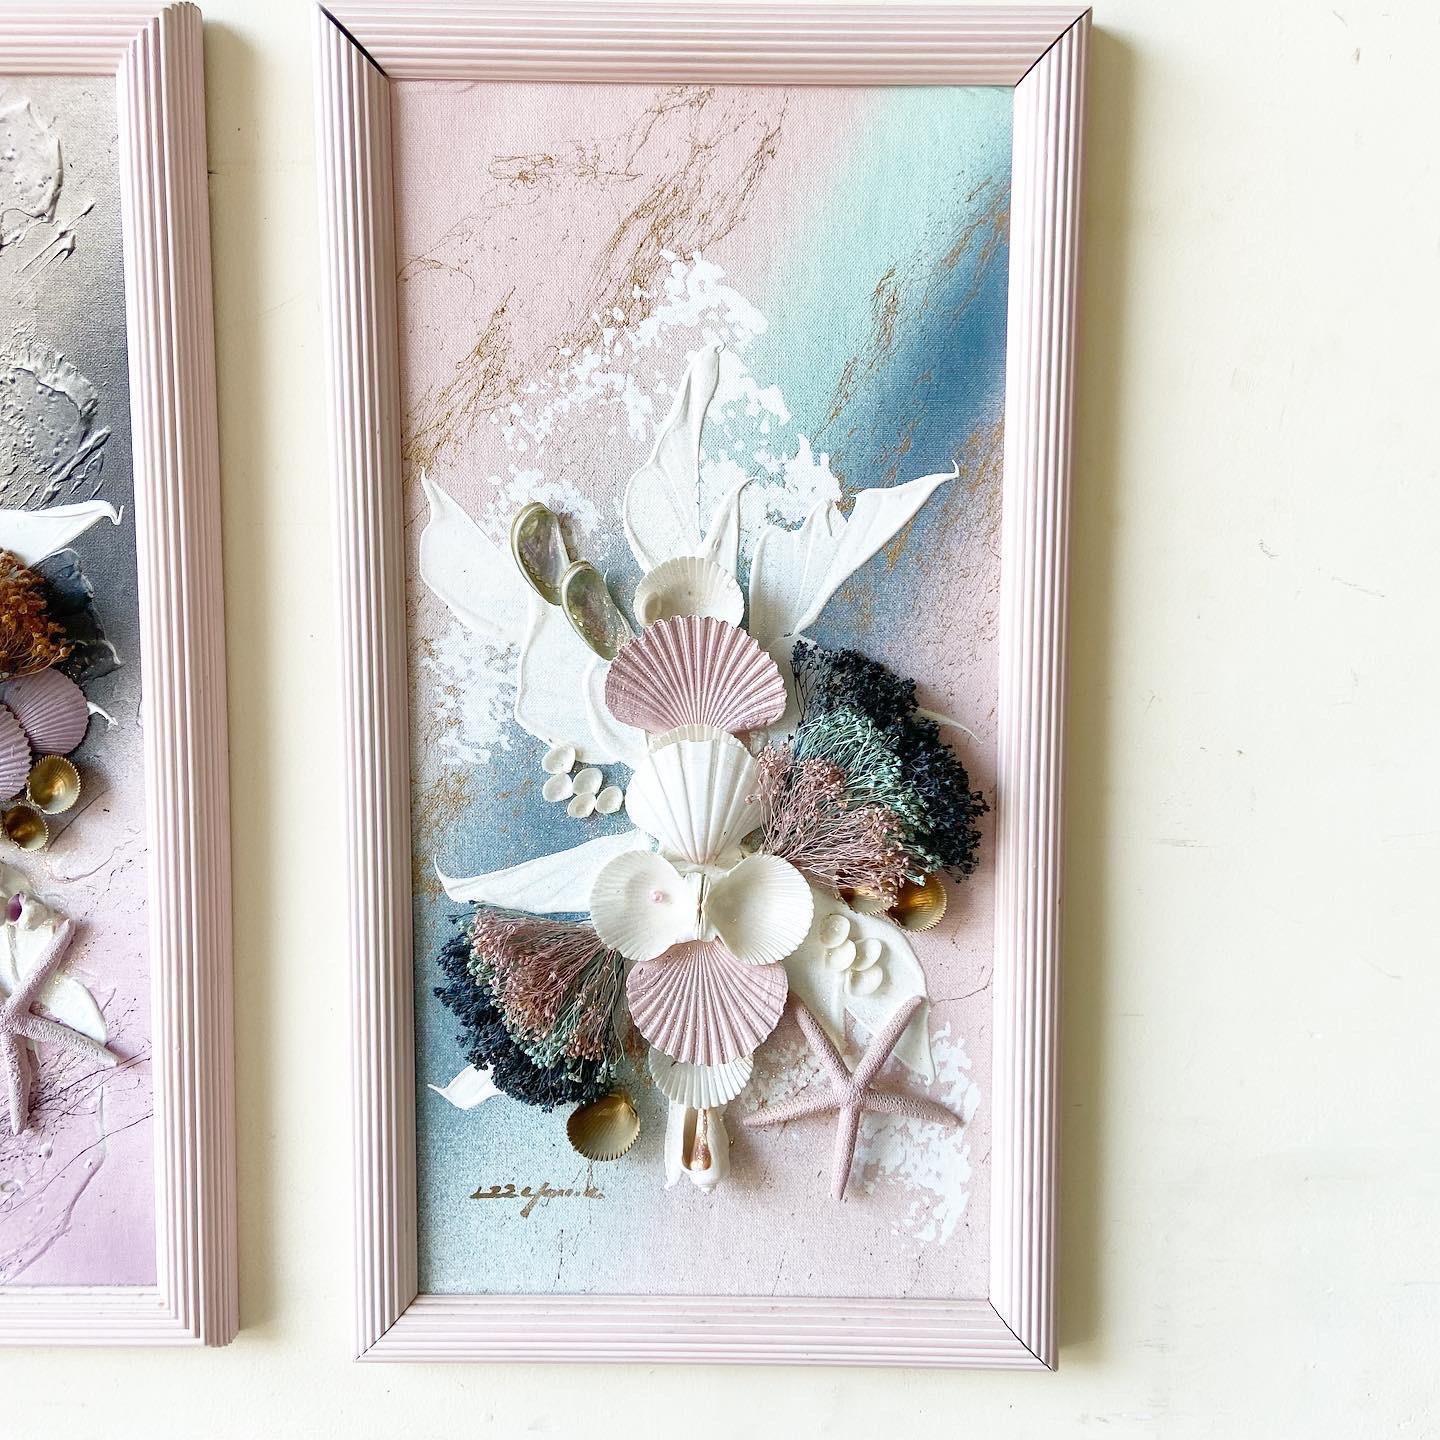 Amazing pair of framed and signed seashell art. Purple and blue painted onto the canvas.
